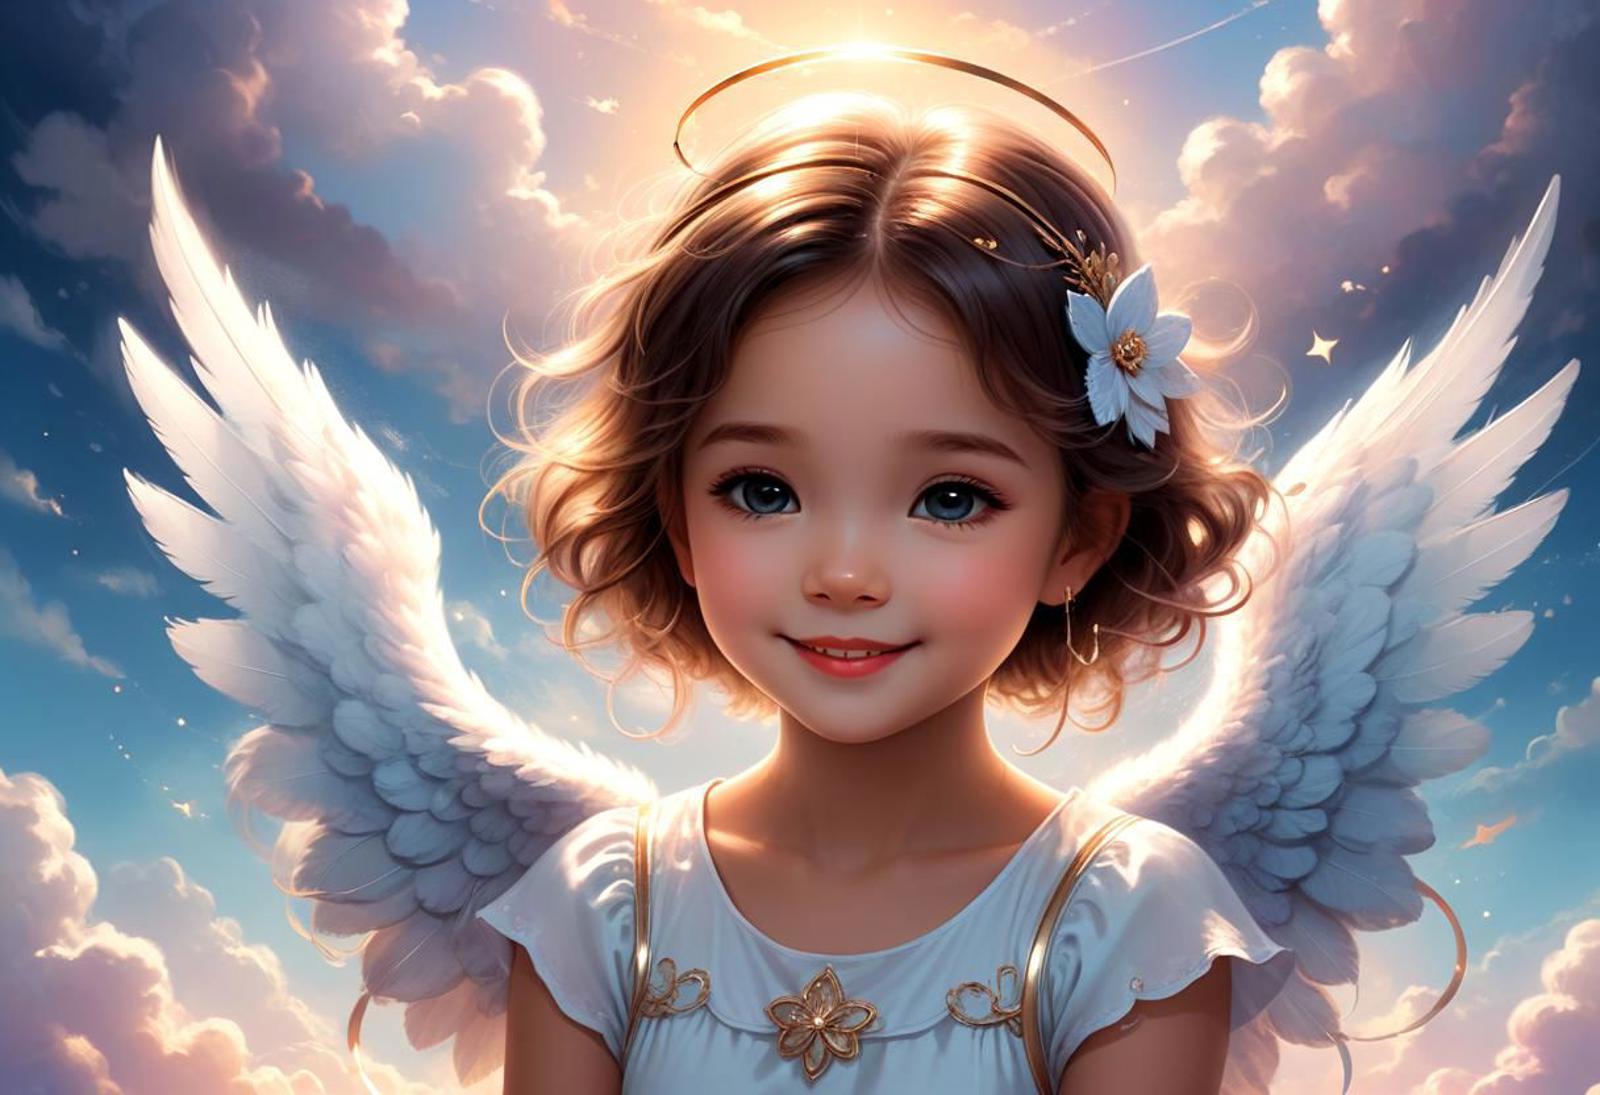 Cute smiling adorable little angel in the Sky, cartoon art 2d art, fluffy detAiled wings, surrounded by cute clouds, illum...